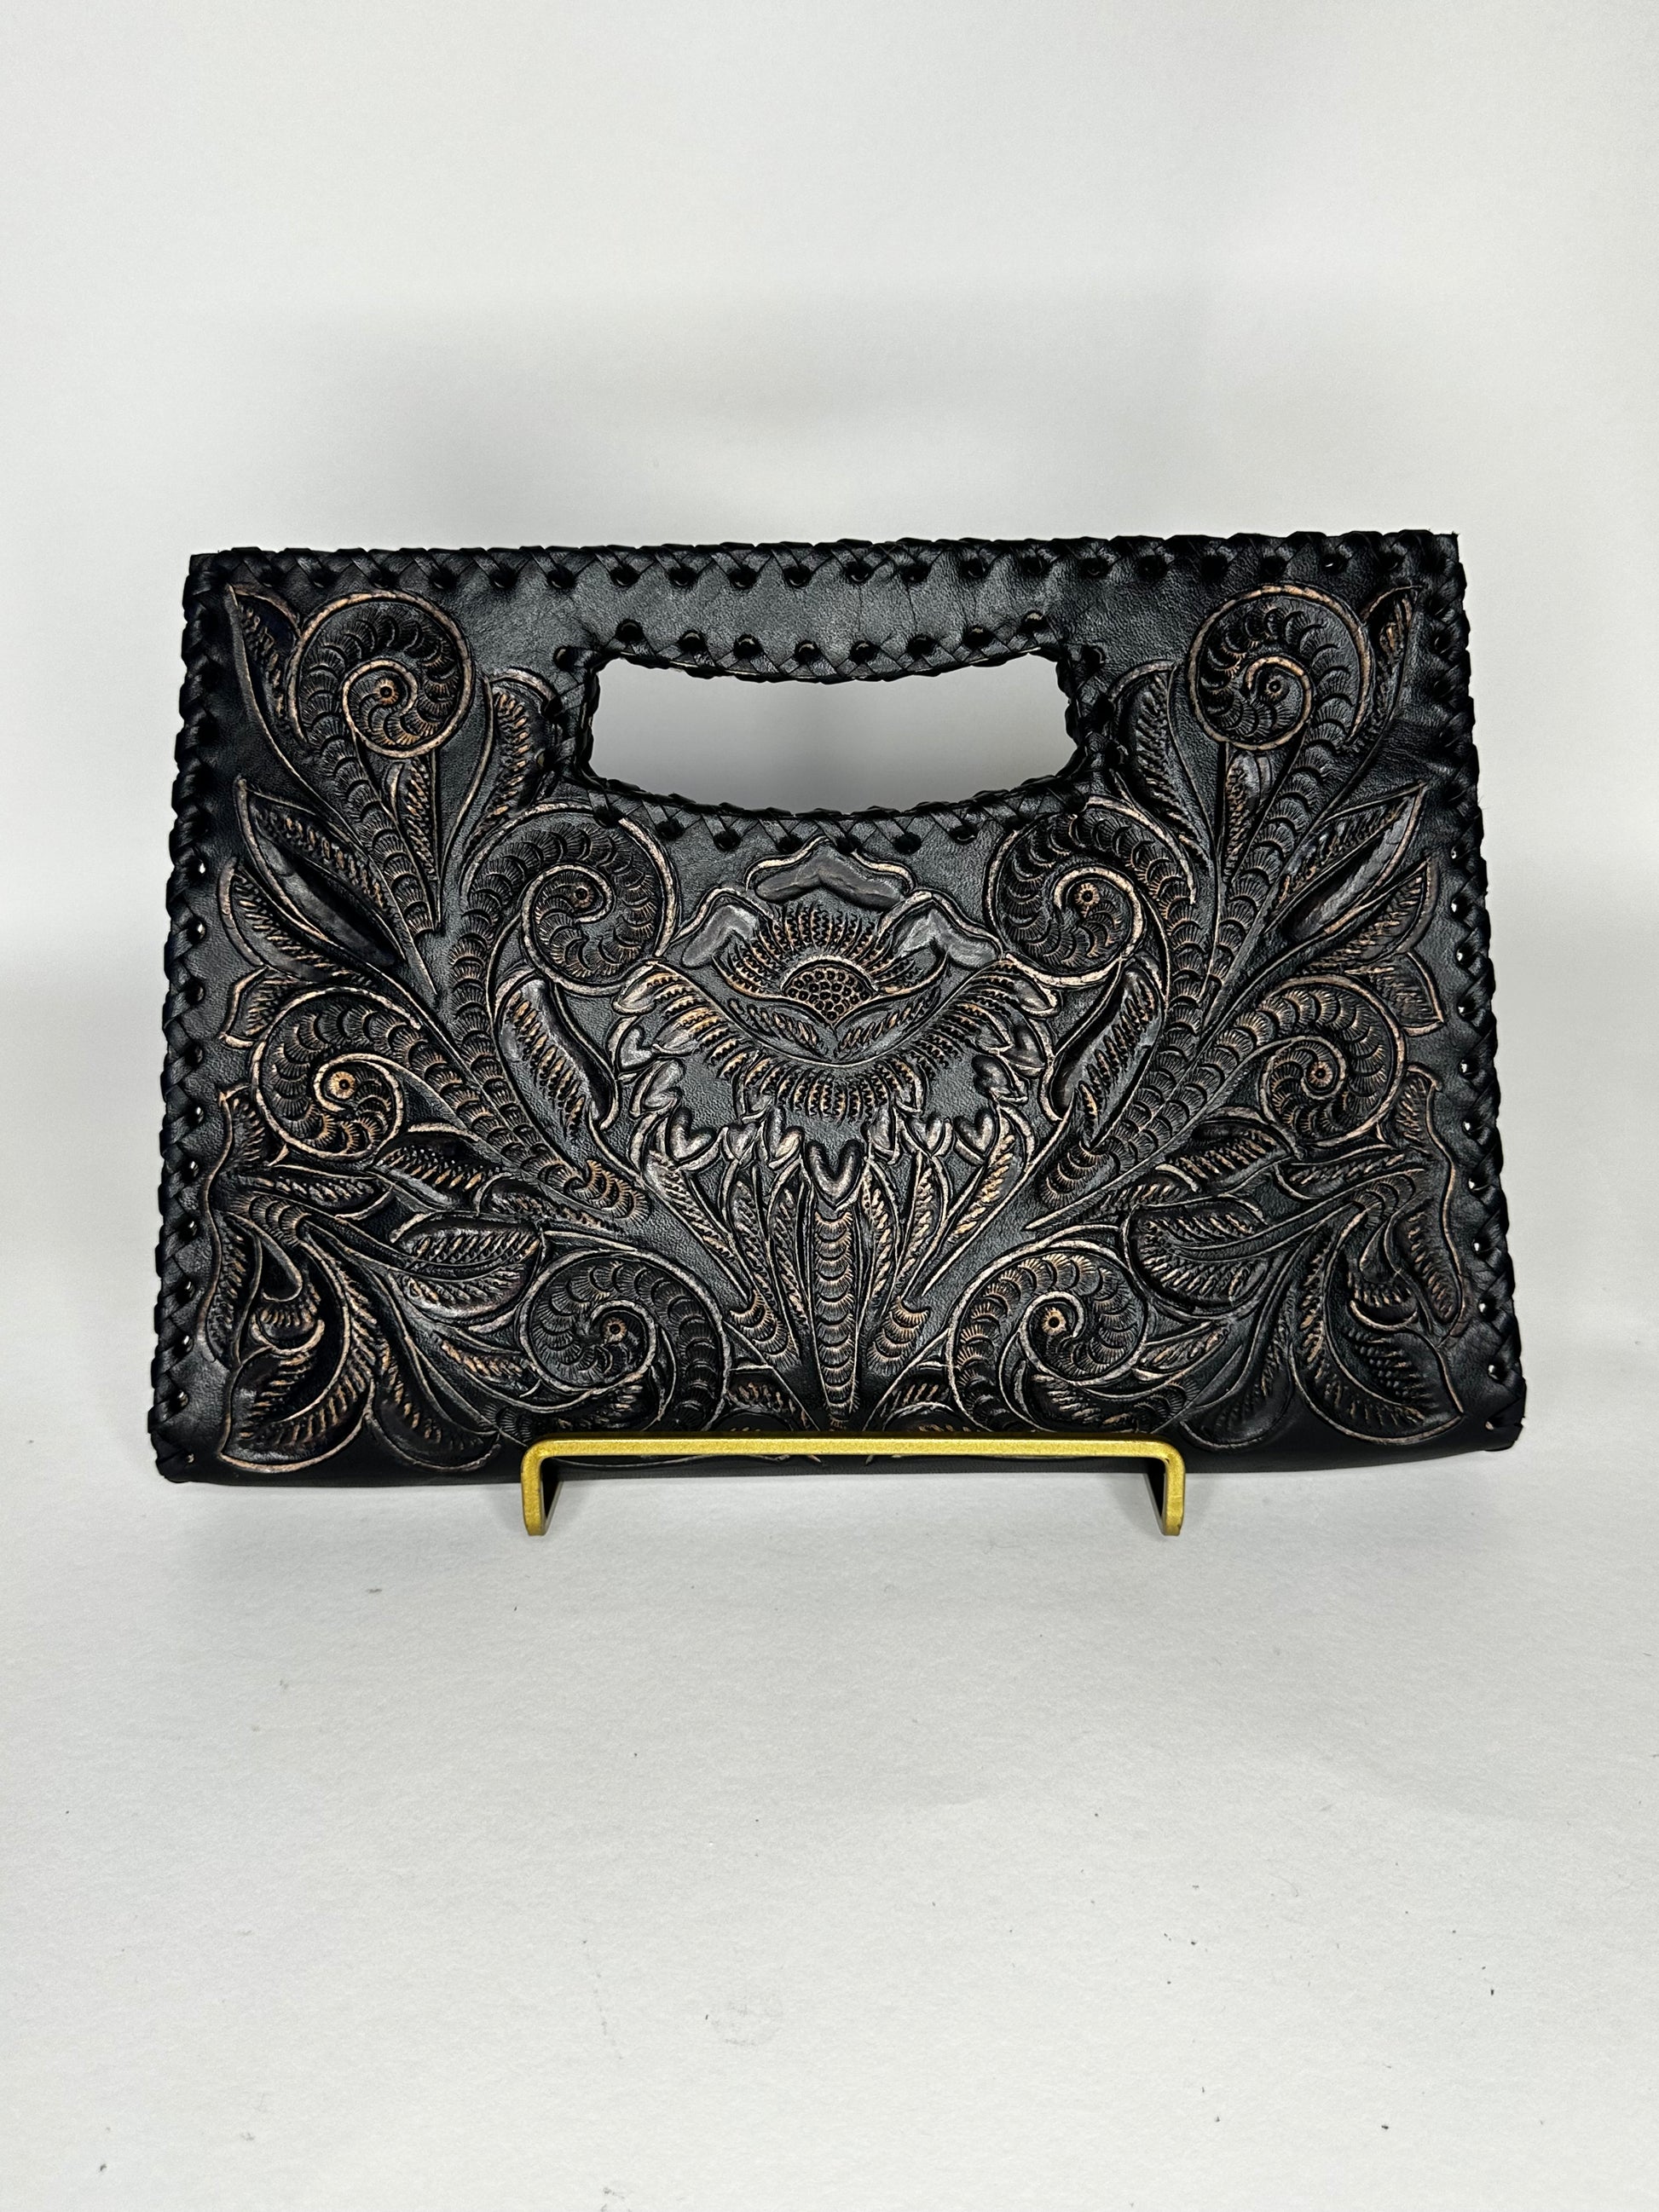 Small Mexican leather handbag with traditional design hand etched throughout the bag. Has handle mid top. leather stitching all around. Color black. 